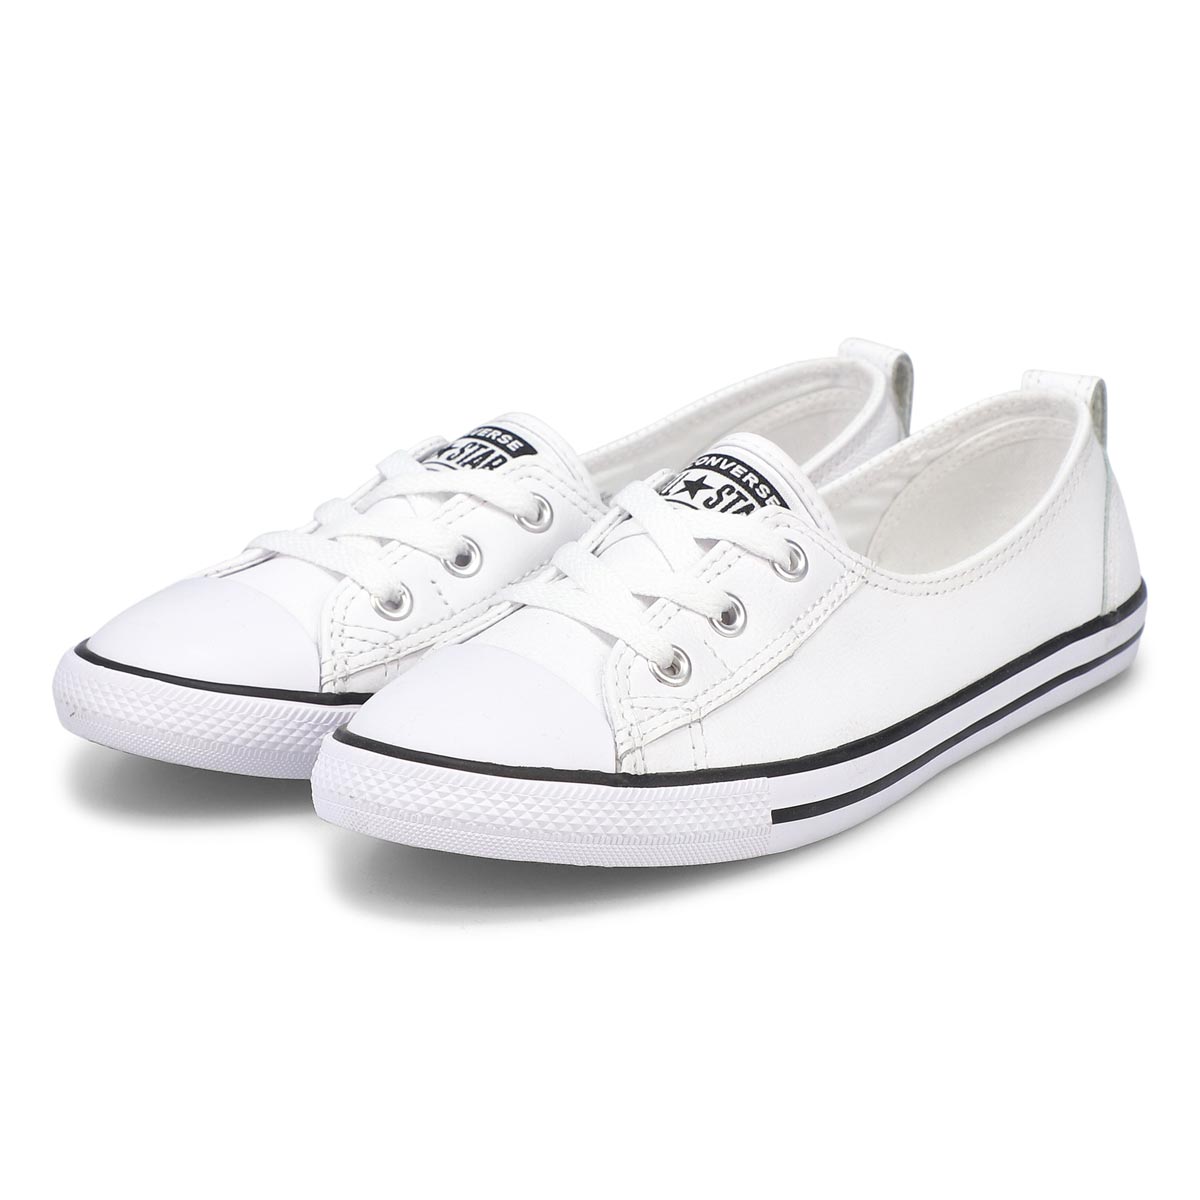 Converse Women's All Star Ballet Lace Leather | SoftMoc.com